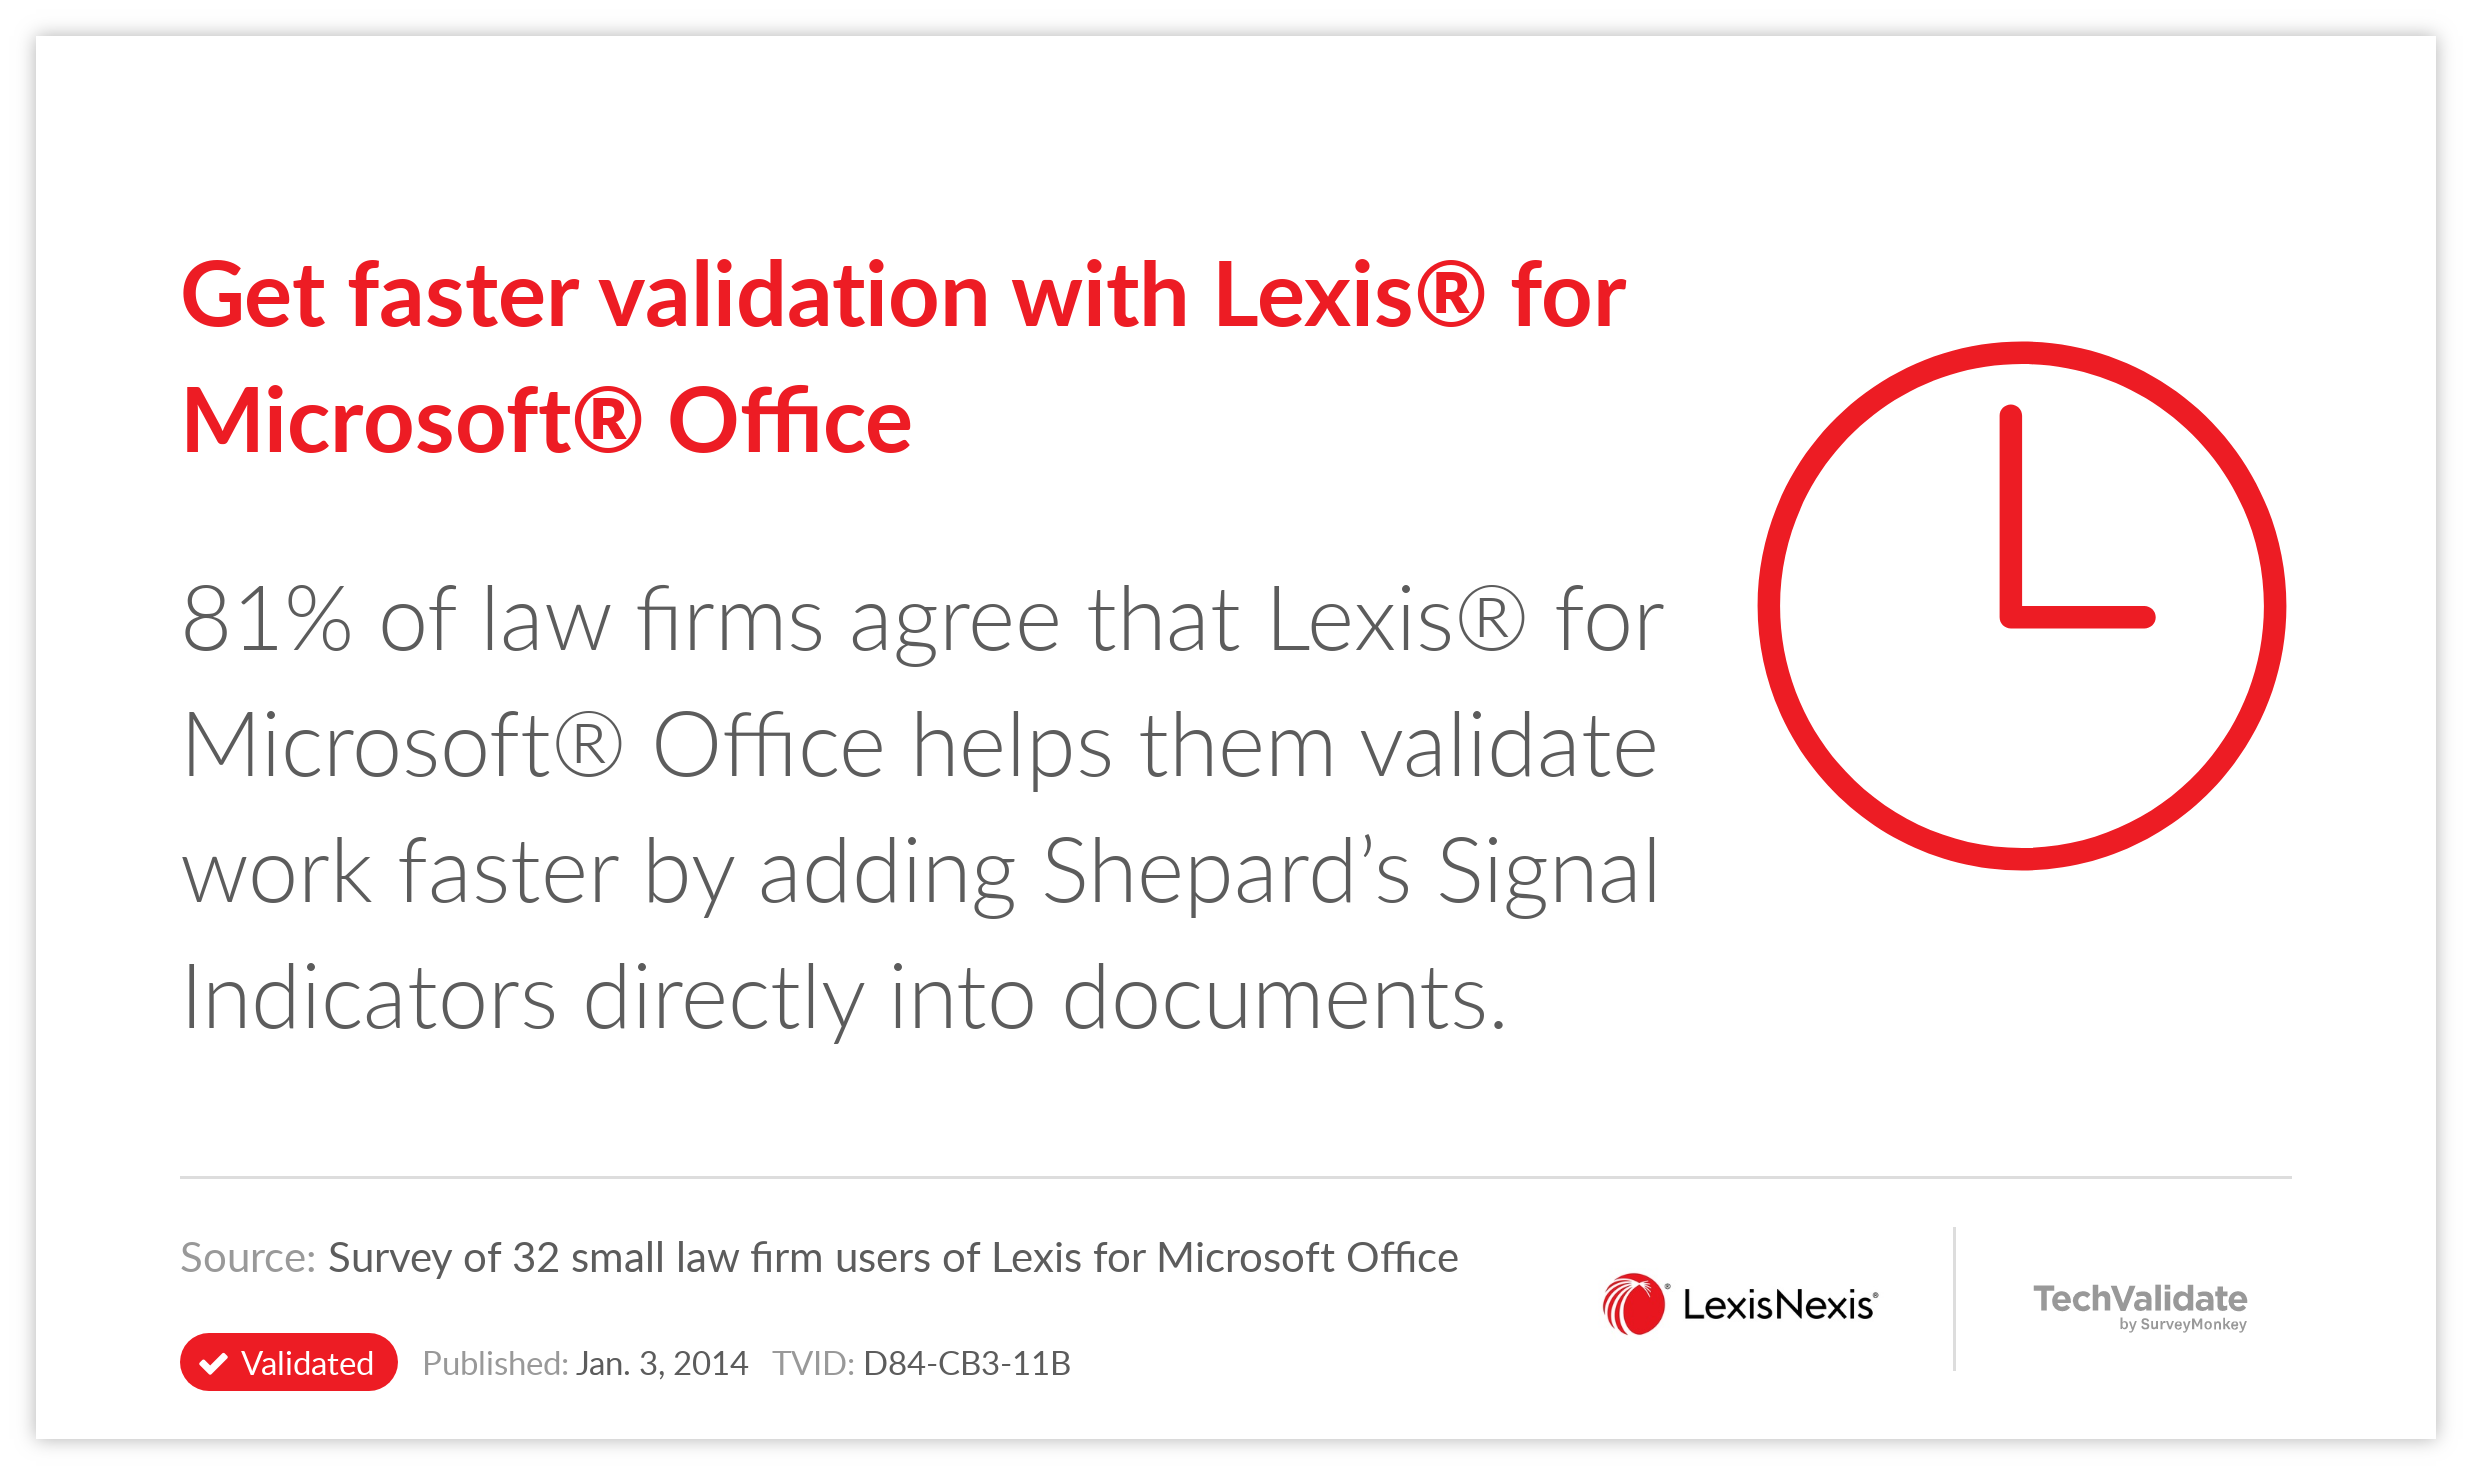 Get faster validation with Lexis® for Microsoft® Office